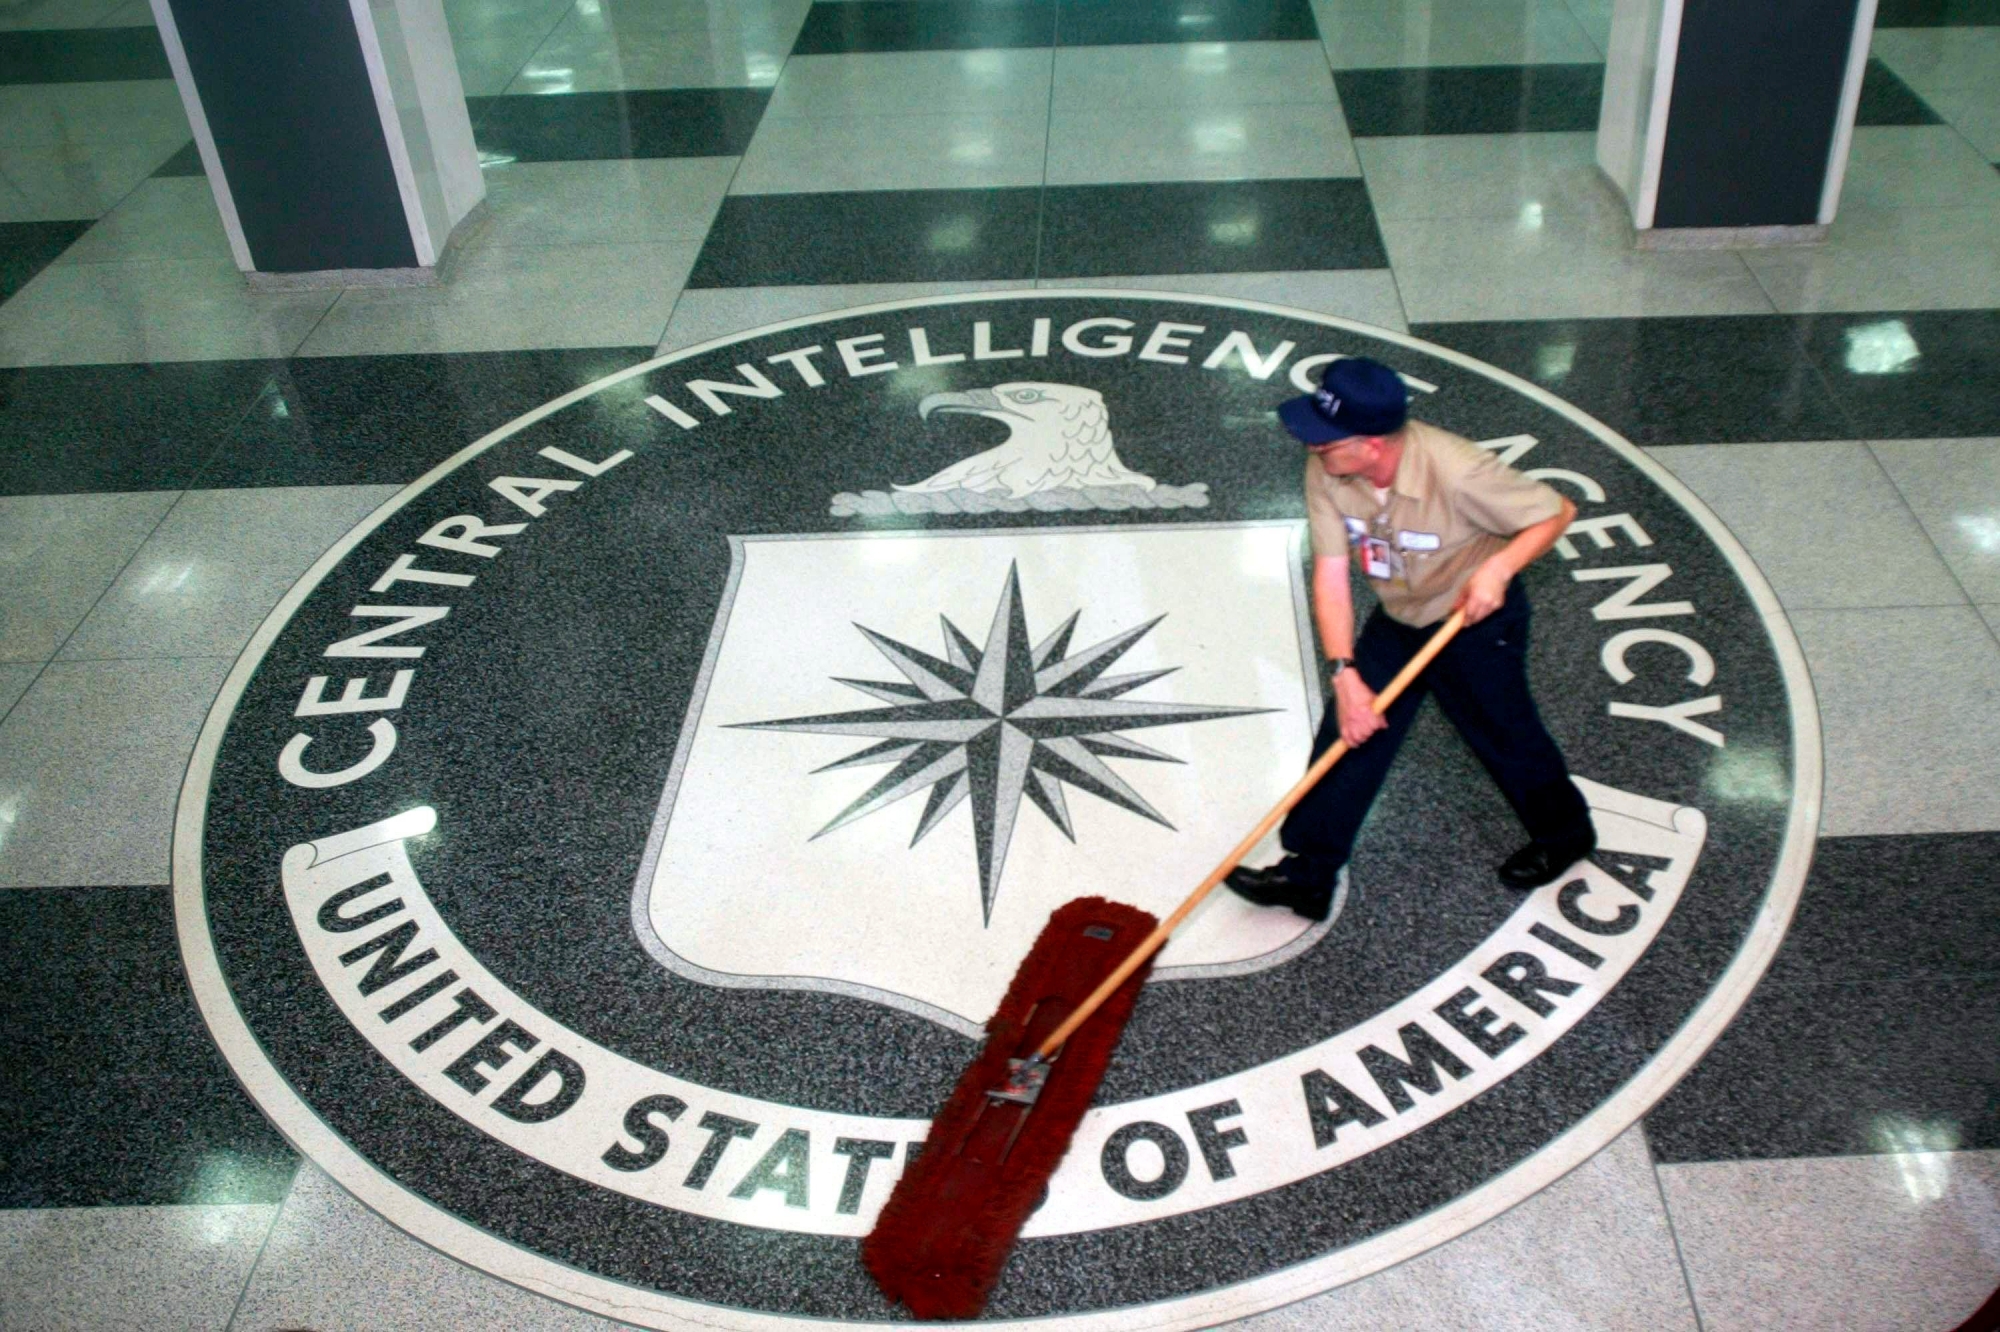 epa05834710 (FILE) - A worker at the CIA sweeping the foyer clean at the CIA Headquarters, Langley, Virginia, USA, 03 March 2005 (reissued 07 March 2017). According to whistleblower website WikiLeaks on 07 March 2017, the organization has published documents codenamed 'Vault 7', allegedly originating from CIA's Center for Cyber Intelligence. Based on the documents, Wikileaks claims that the CIA hackers were able to hack into iPhones, Android phones and smart TV sets.  EPA/DENNIS BRACK / POOL (FILE) USA ESPIONAGE HACKING CIA WIKILEAKS